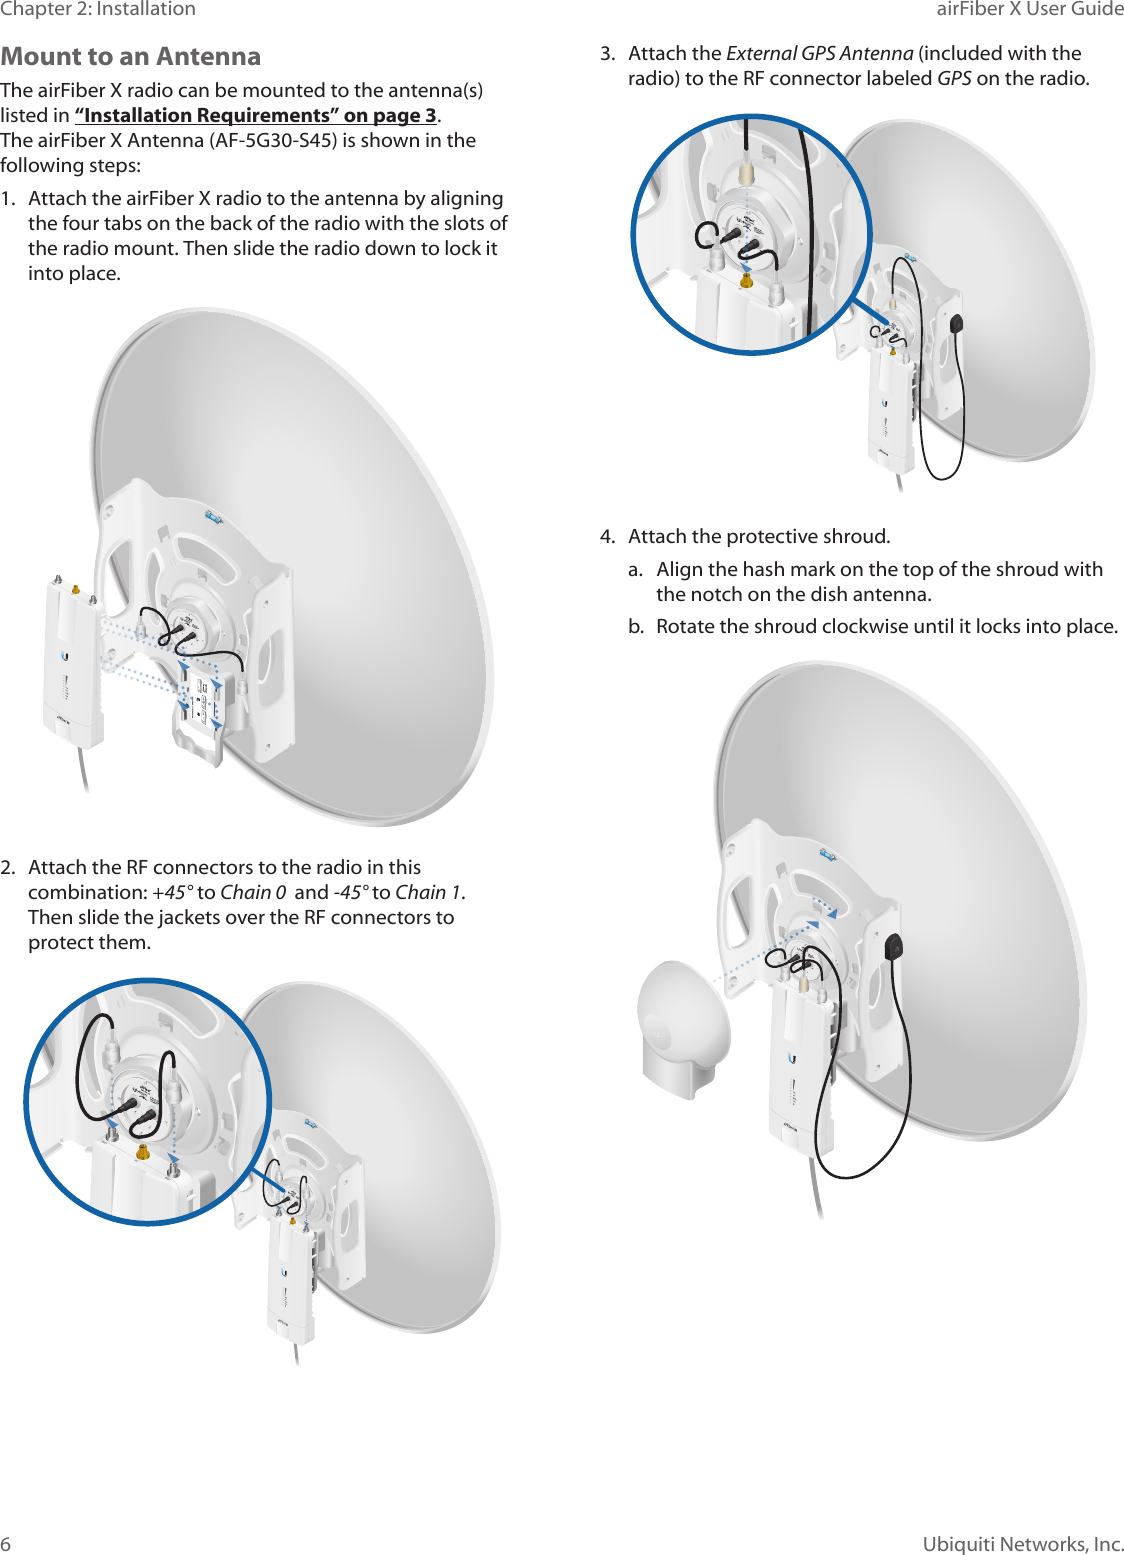 6Chapter 2: Installation airFiber X User GuideUbiquiti Networks, Inc.Mount to an AntennaThe airFiberX radio can be mounted to the antenna(s) listed in “Installation Requirements” on page 3. The airFiberX Antenna (AF-5G30-S45) is shown in the following steps:1.  Attach the airFiber X radio to the antenna by aligning the four tabs on the back of the radio with the slots of the radio mount. Then slide the radio down to lock it into place.2.  Attach the RF connectors to the radio in this combination: +45°to Chain 0  and -45° to Chain 1. Thenslide the jackets over the RF connectors to protectthem.3.  Attach the External GPS Antenna (included with the radio) to the RF connector labeled GPS on the radio.4.  Attach the protective shroud. a.  Align the hash mark on the top of the shroud with the notch on the dish antenna. b.  Rotate the shroud clockwise until it locks into place.